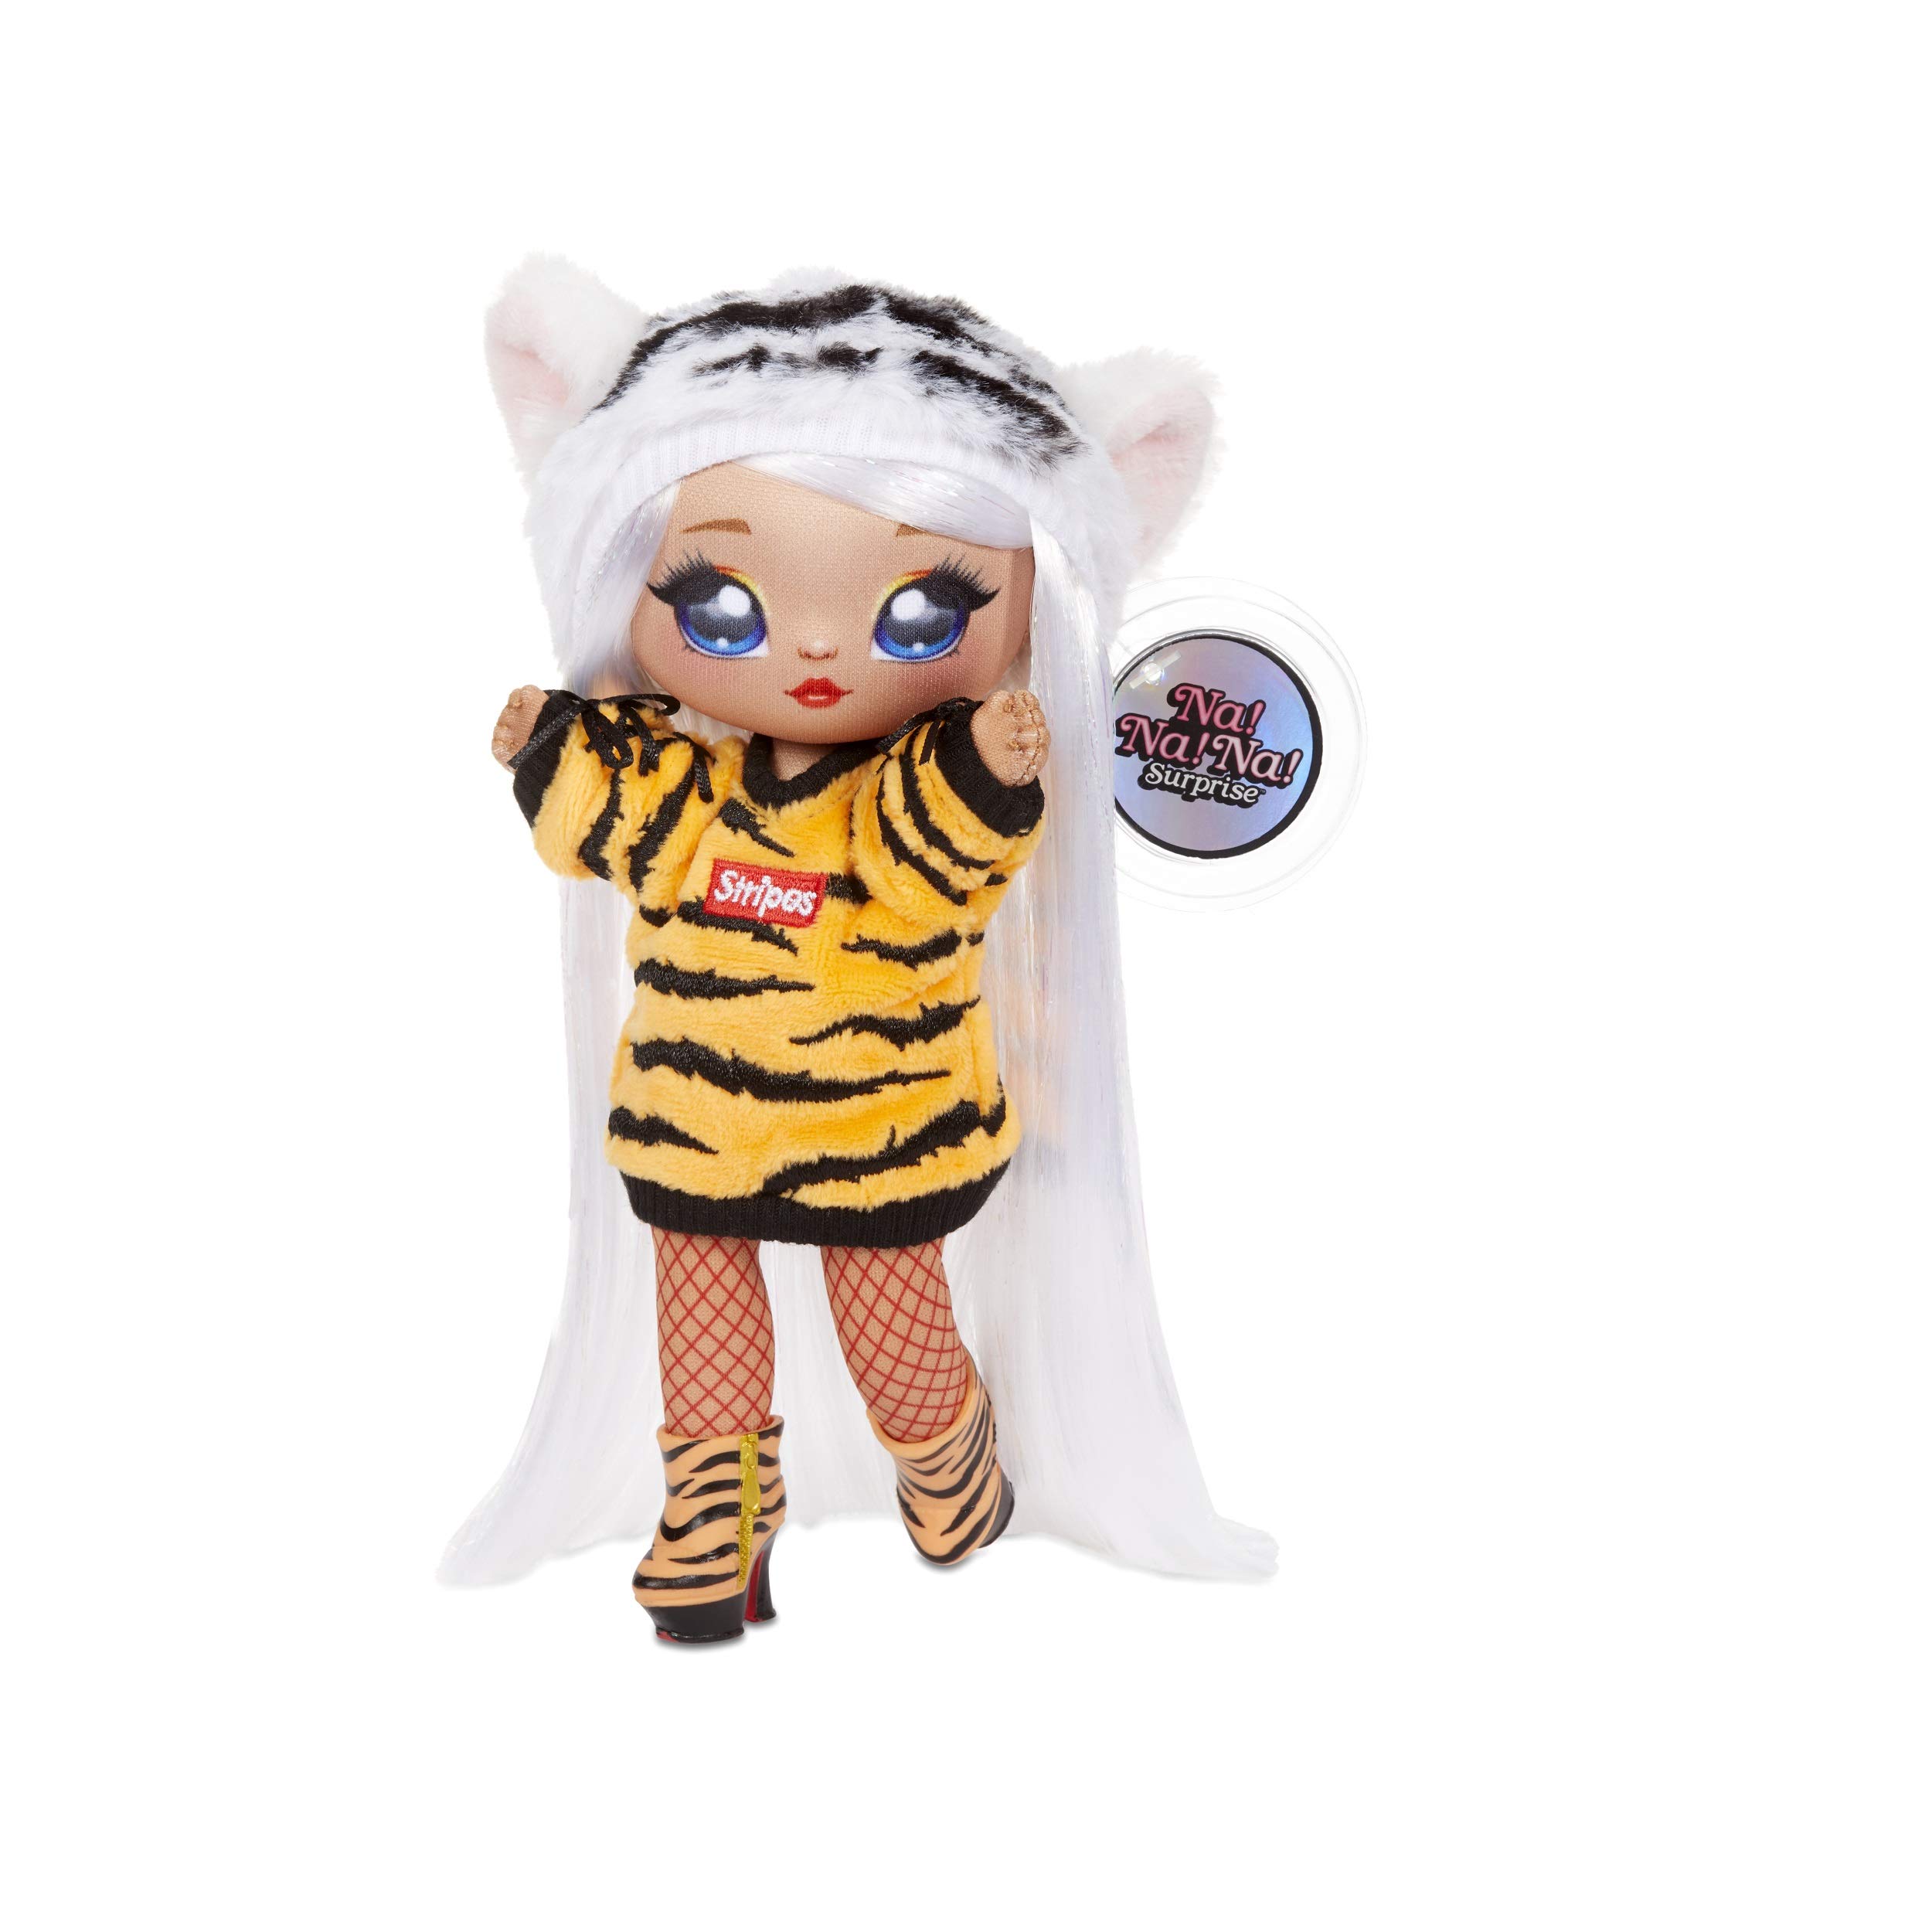 Na! Na! Na! Surprise 2-in-1 Bianca Bengal Fashion Doll & -Plush Purse Series 4 – Soft Wallet Bag Pouch Gifts for Kids Girls Key Chain Pom